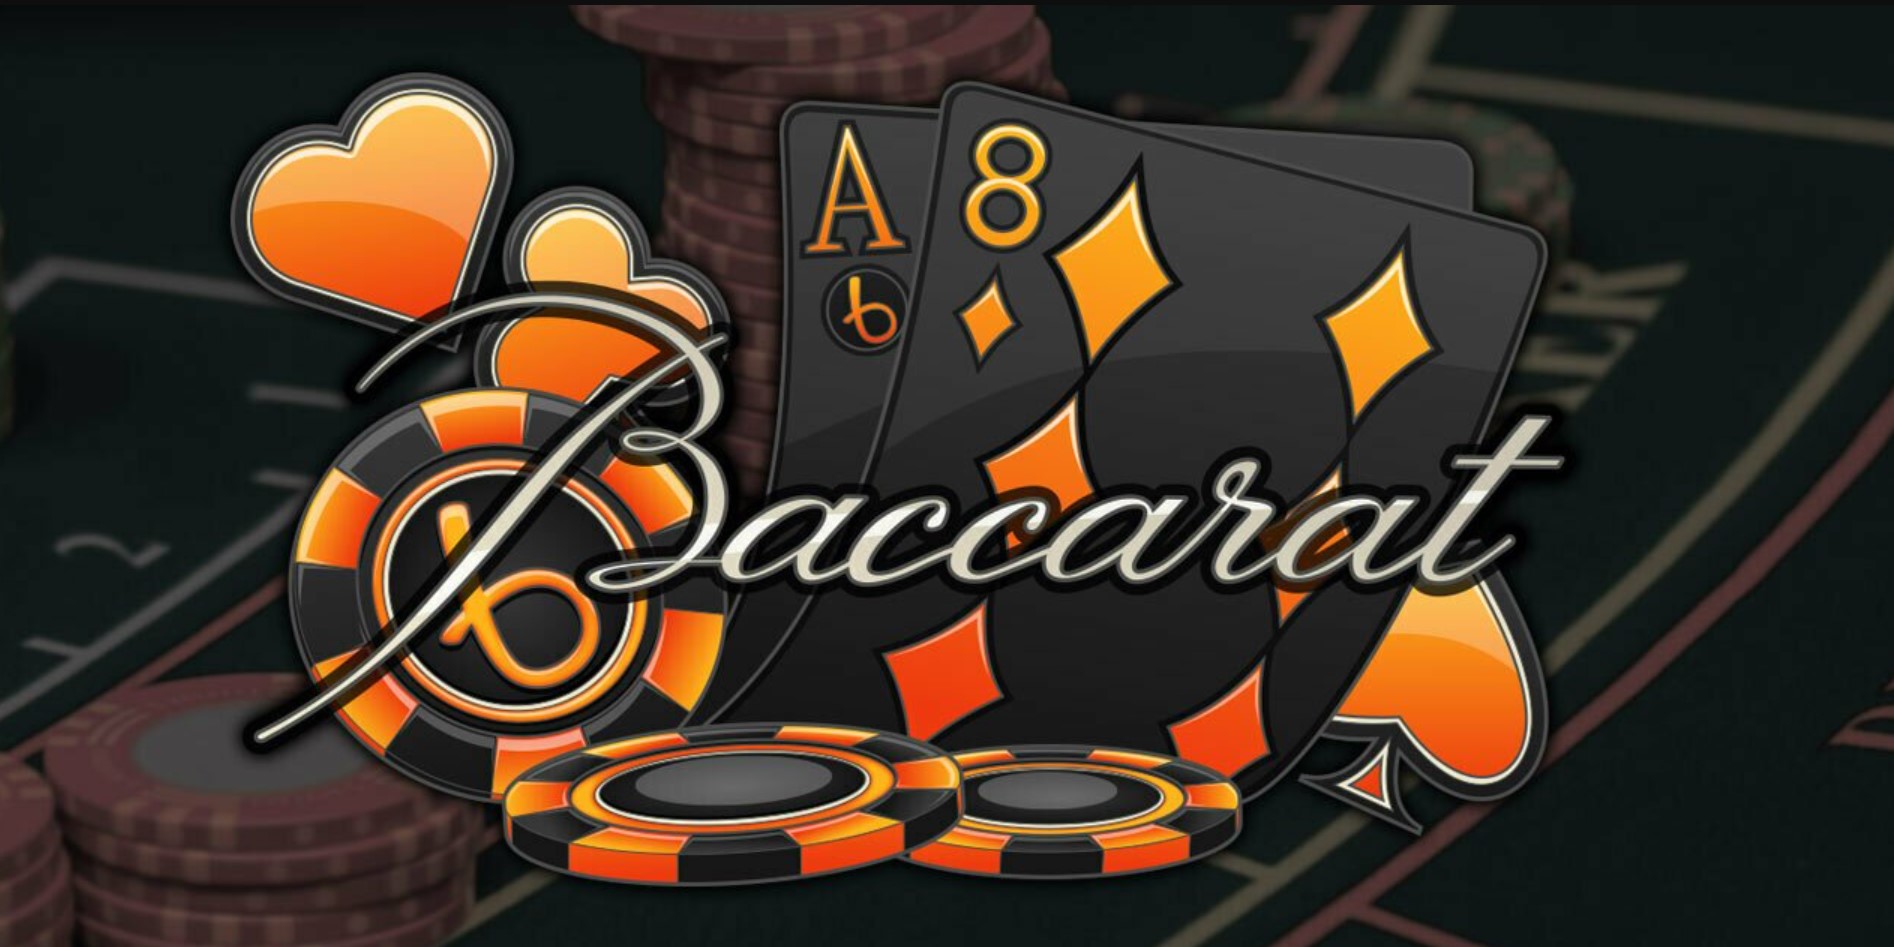 What types of baccarat are there and what are their main differences